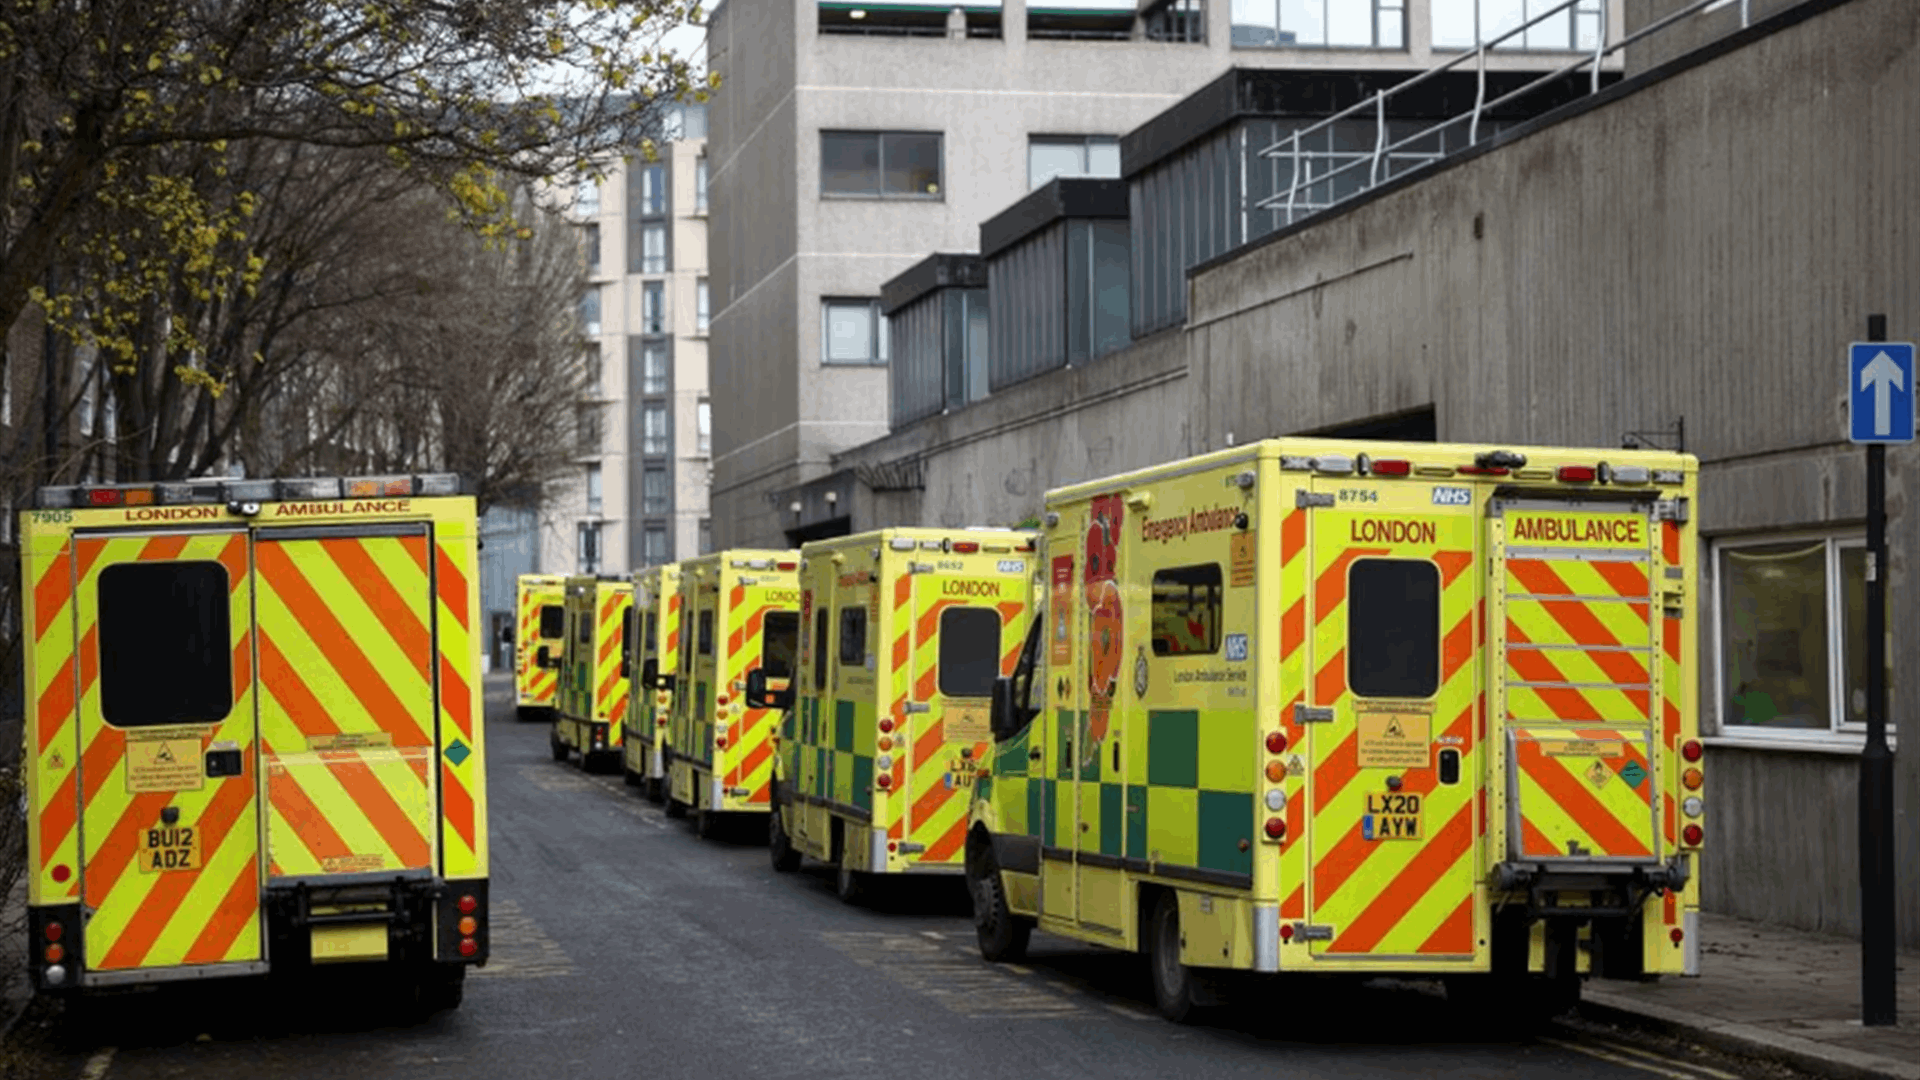 Britain faces new ambulance strike dates in Feb, March